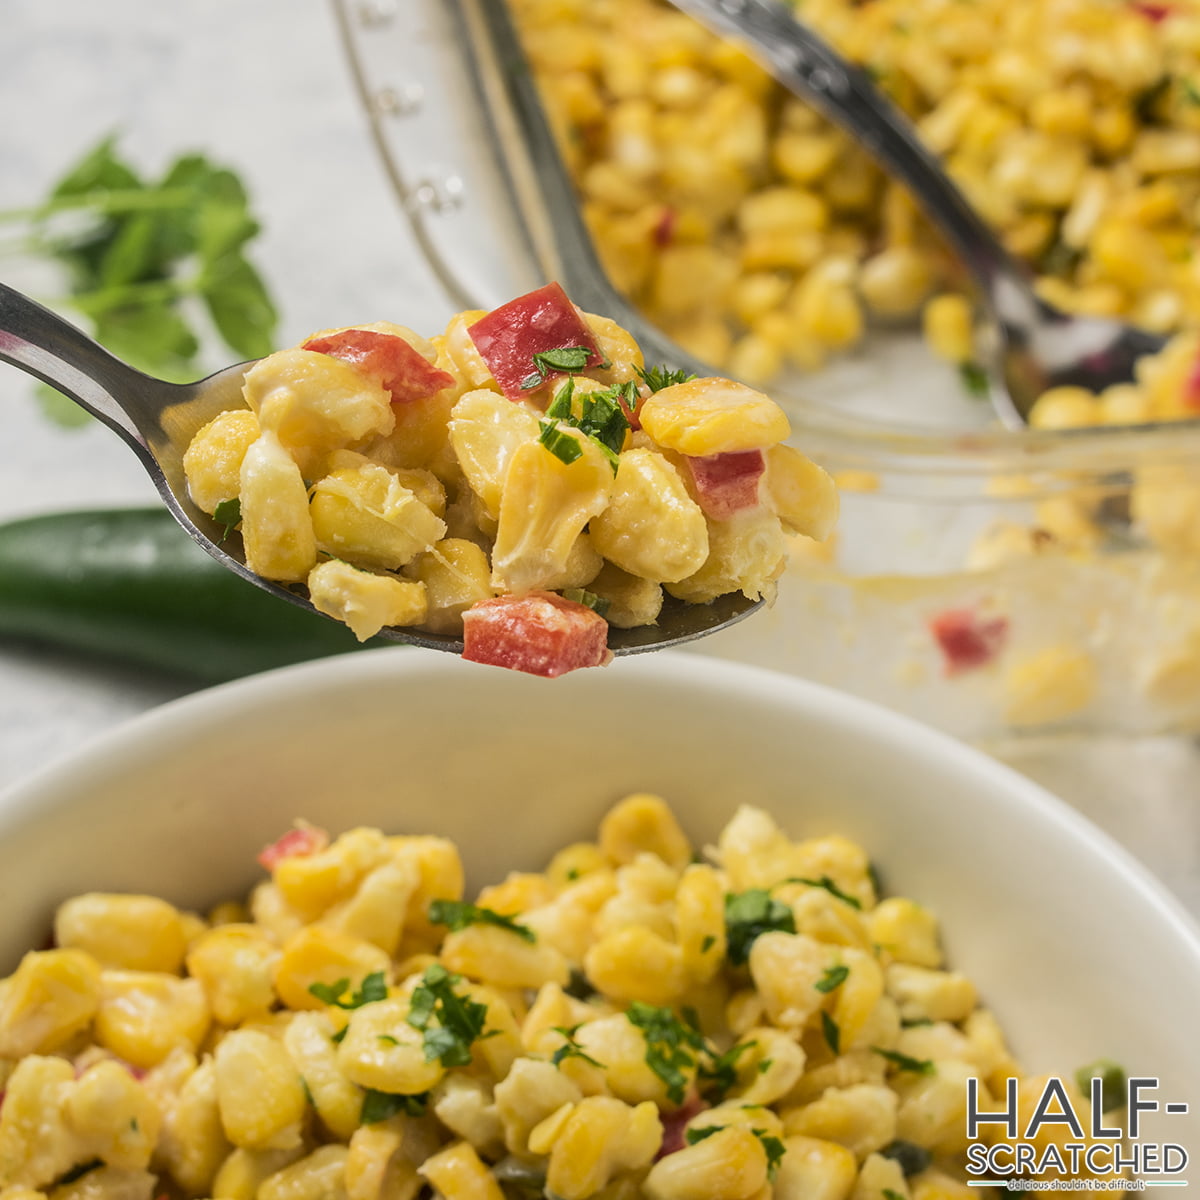 Spoonful of corn casserole showing creamy texture and red bell peppers